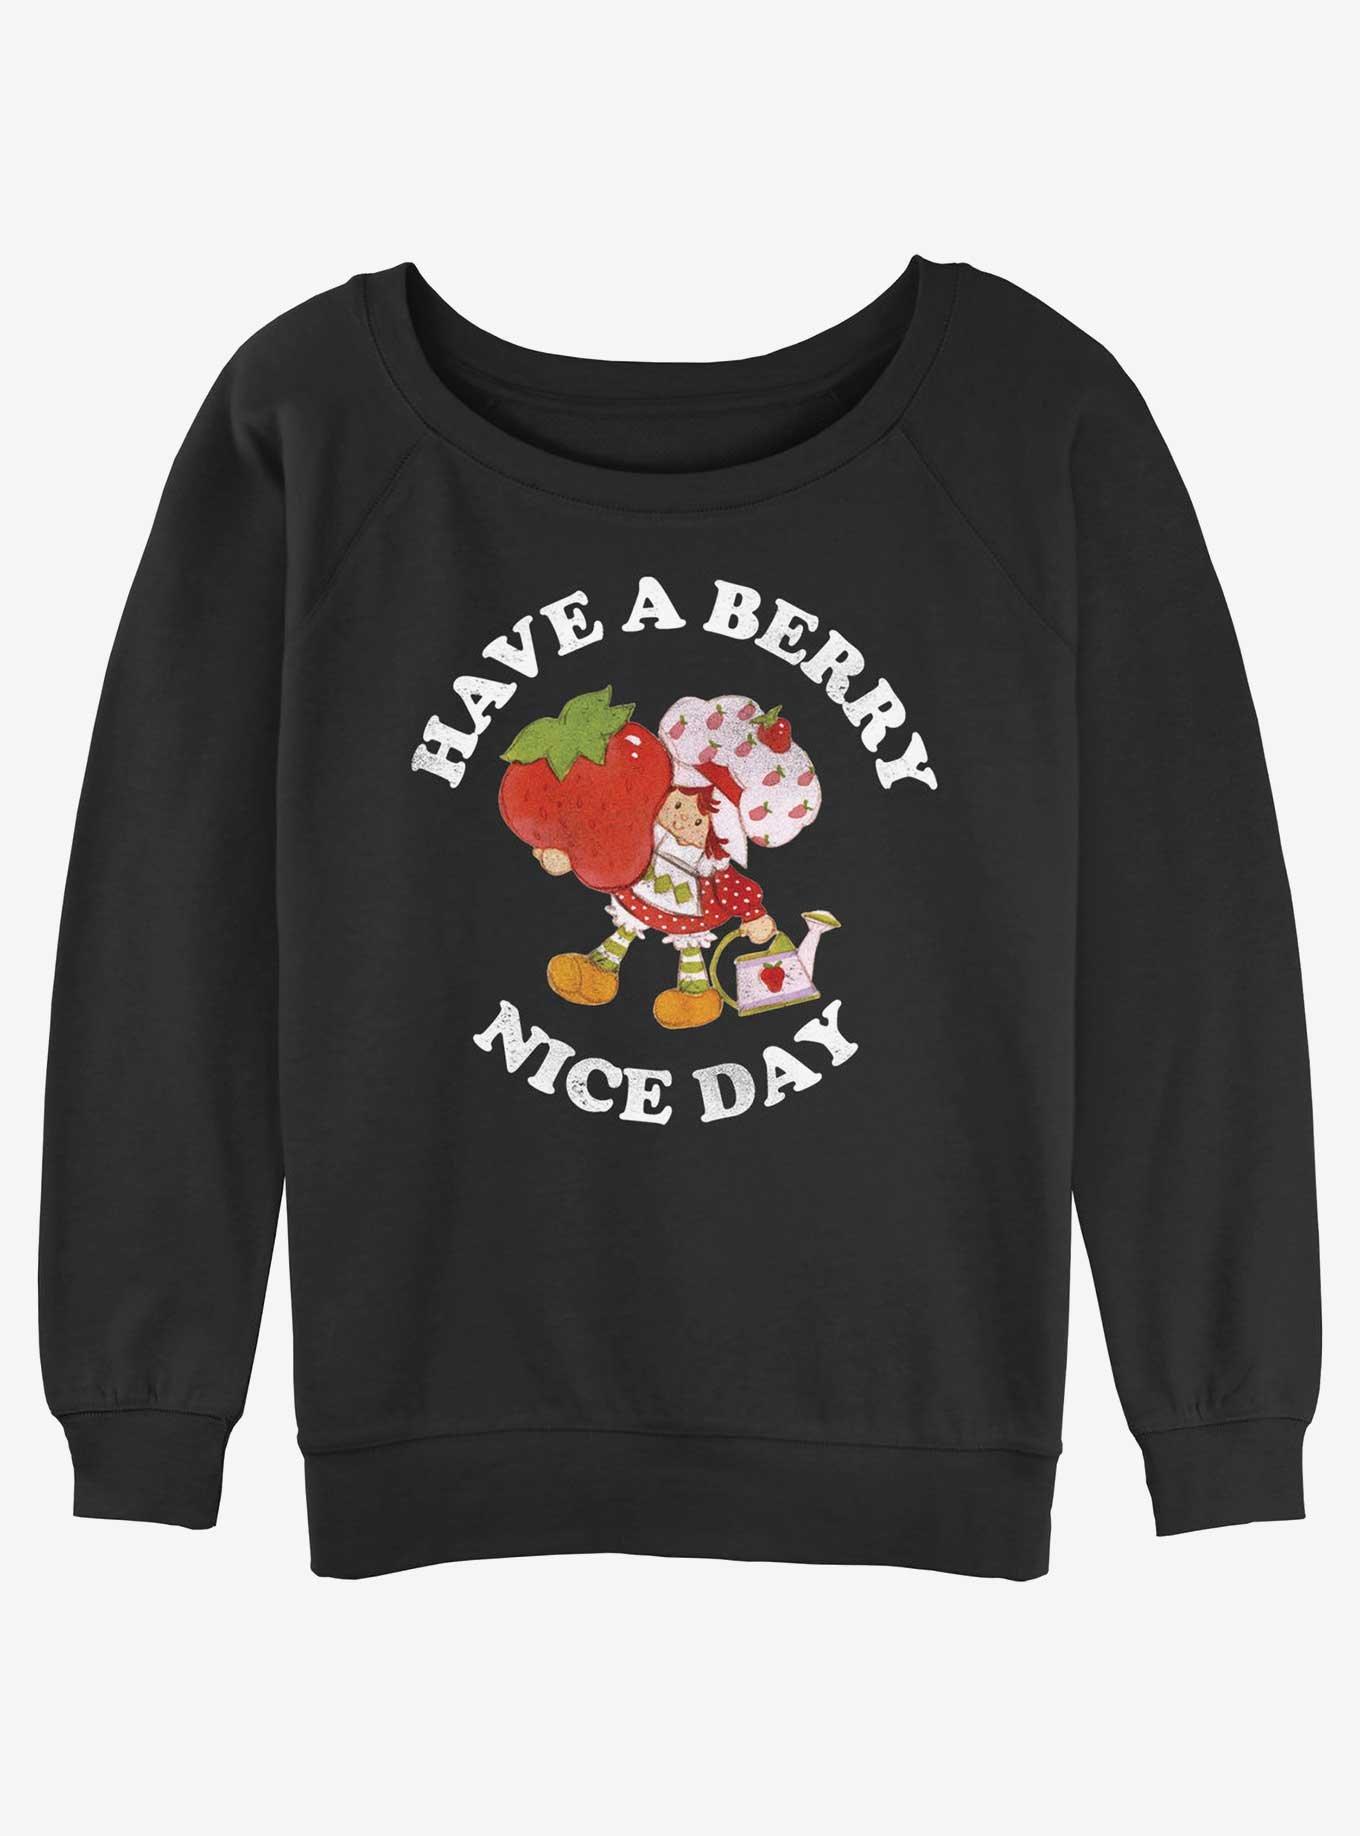 Strawberry Shortcake Have A Berry Nice Day Womens Slouchy Sweatshirt, , hi-res